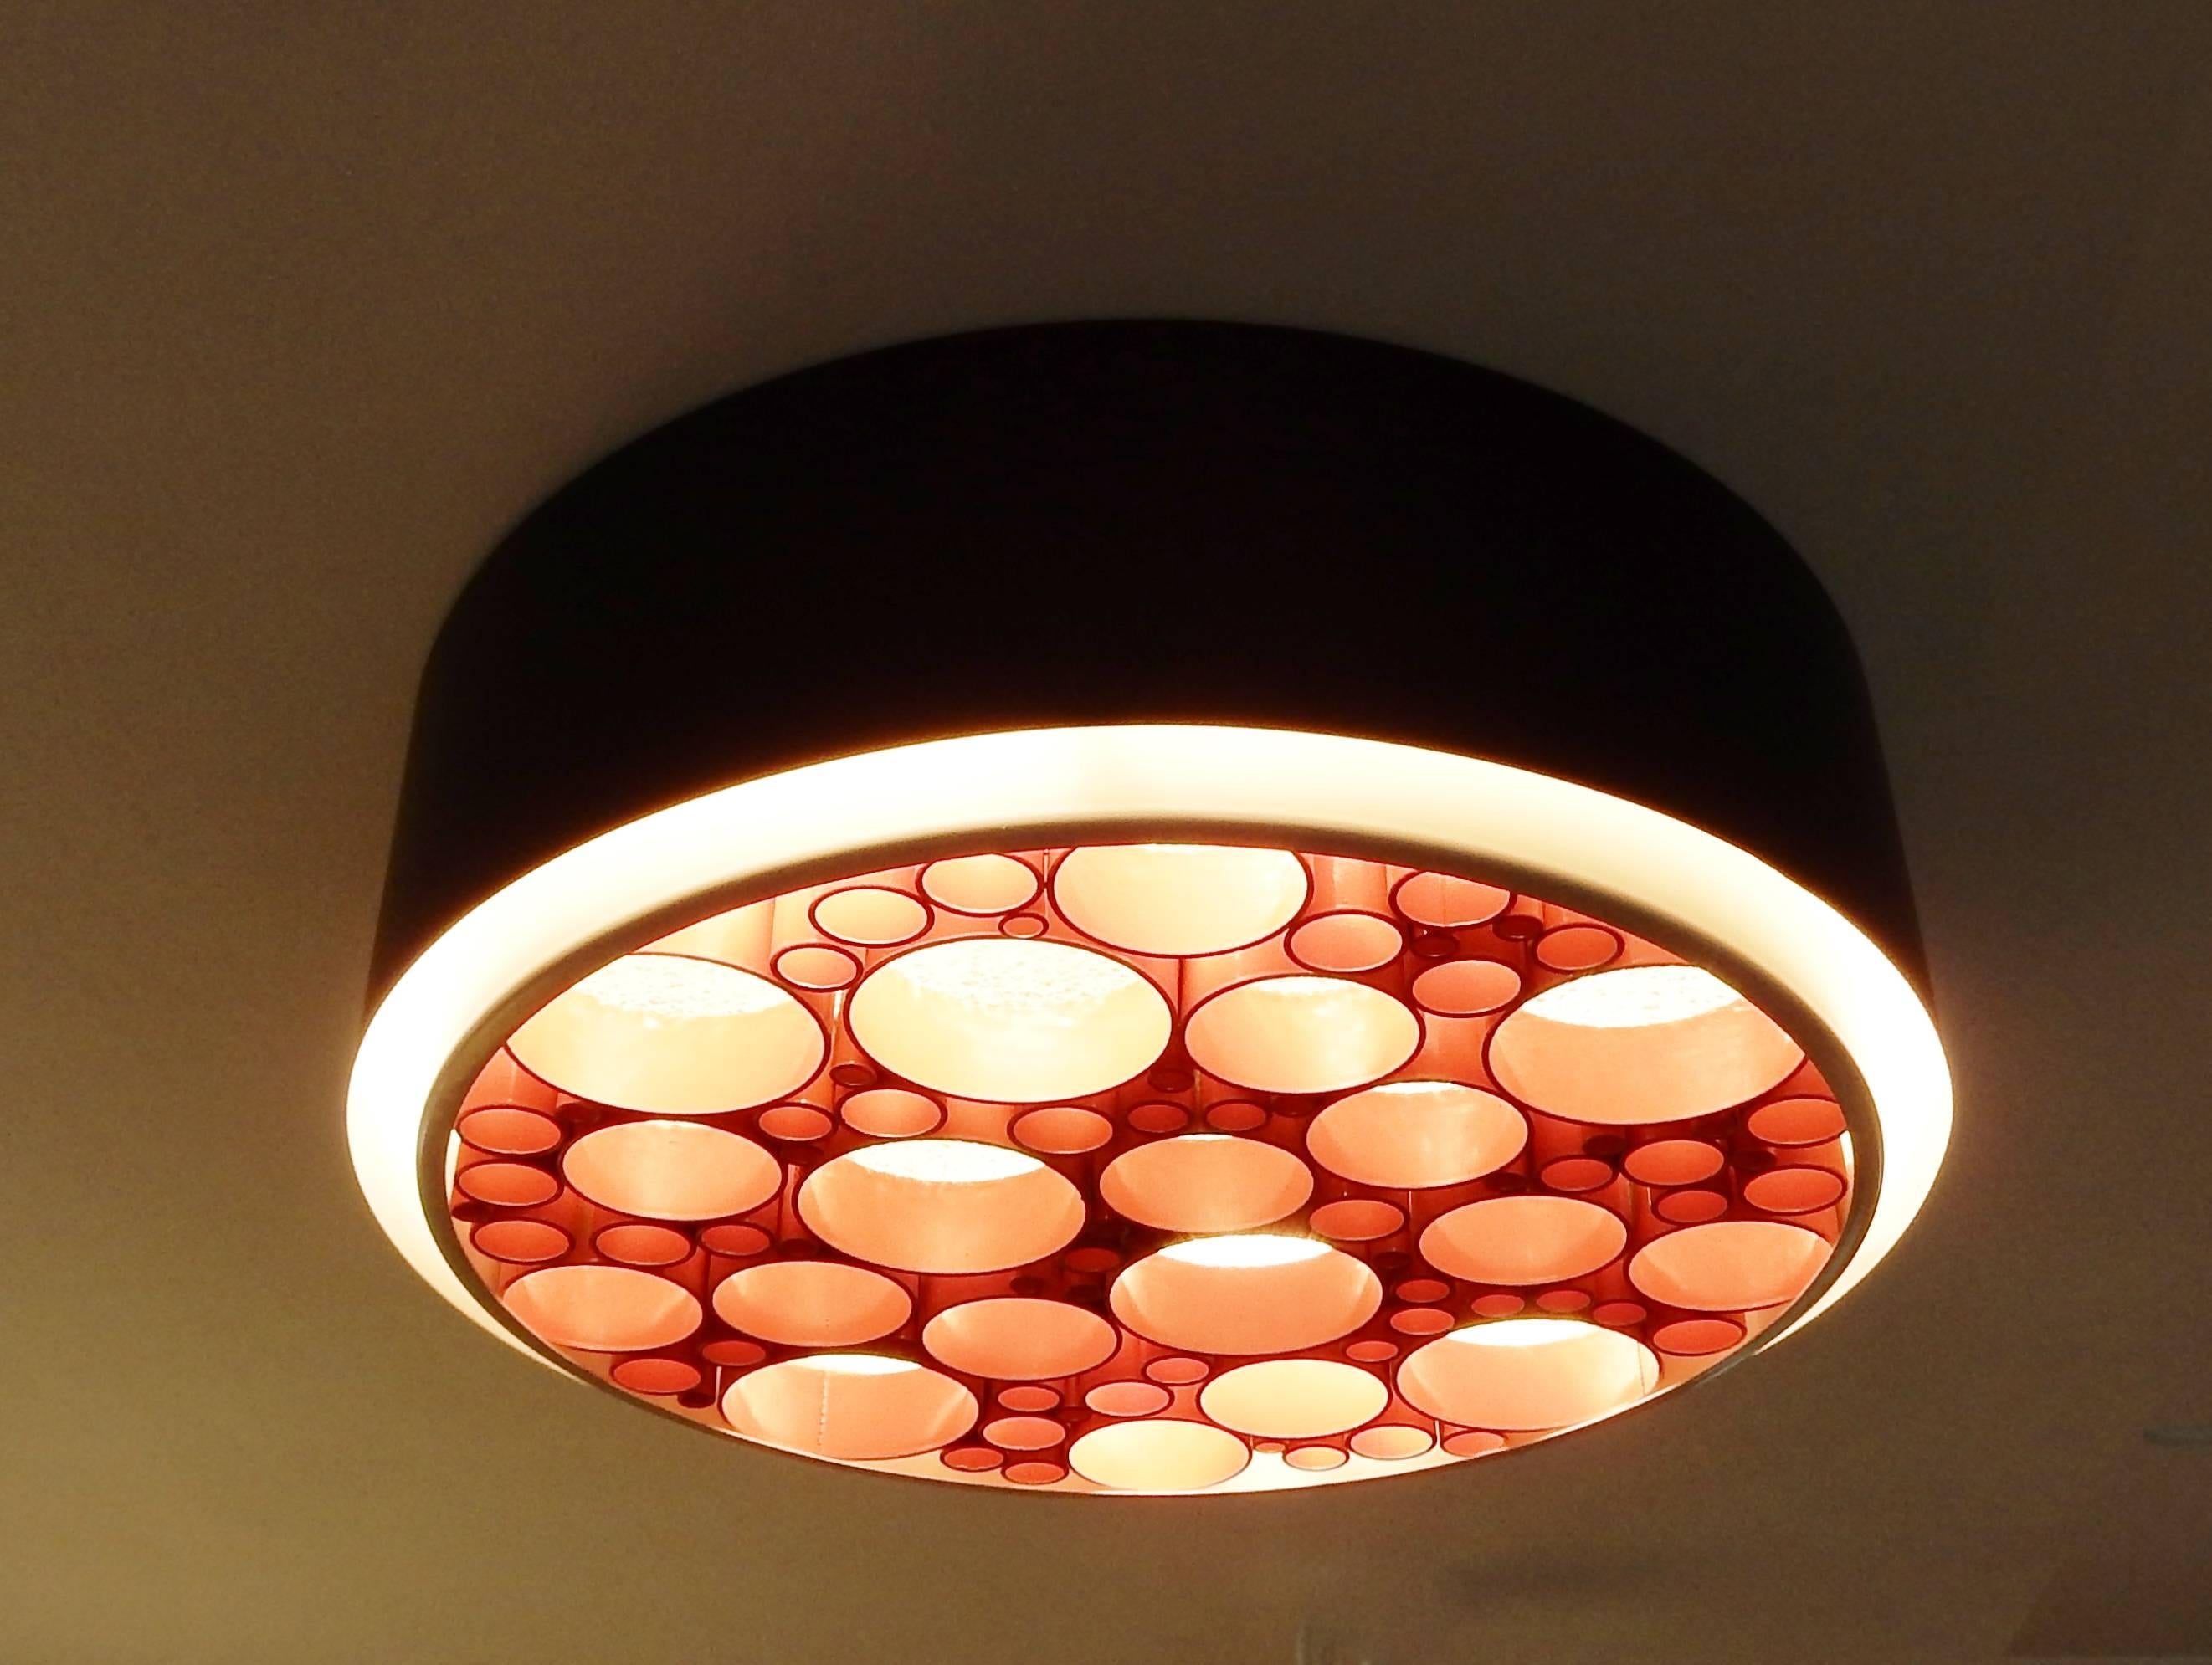 Dutch Model 'Alliance' or 'P-1474' ceiling lamp by RAAK Amsterdam, Netherlands, 1970s